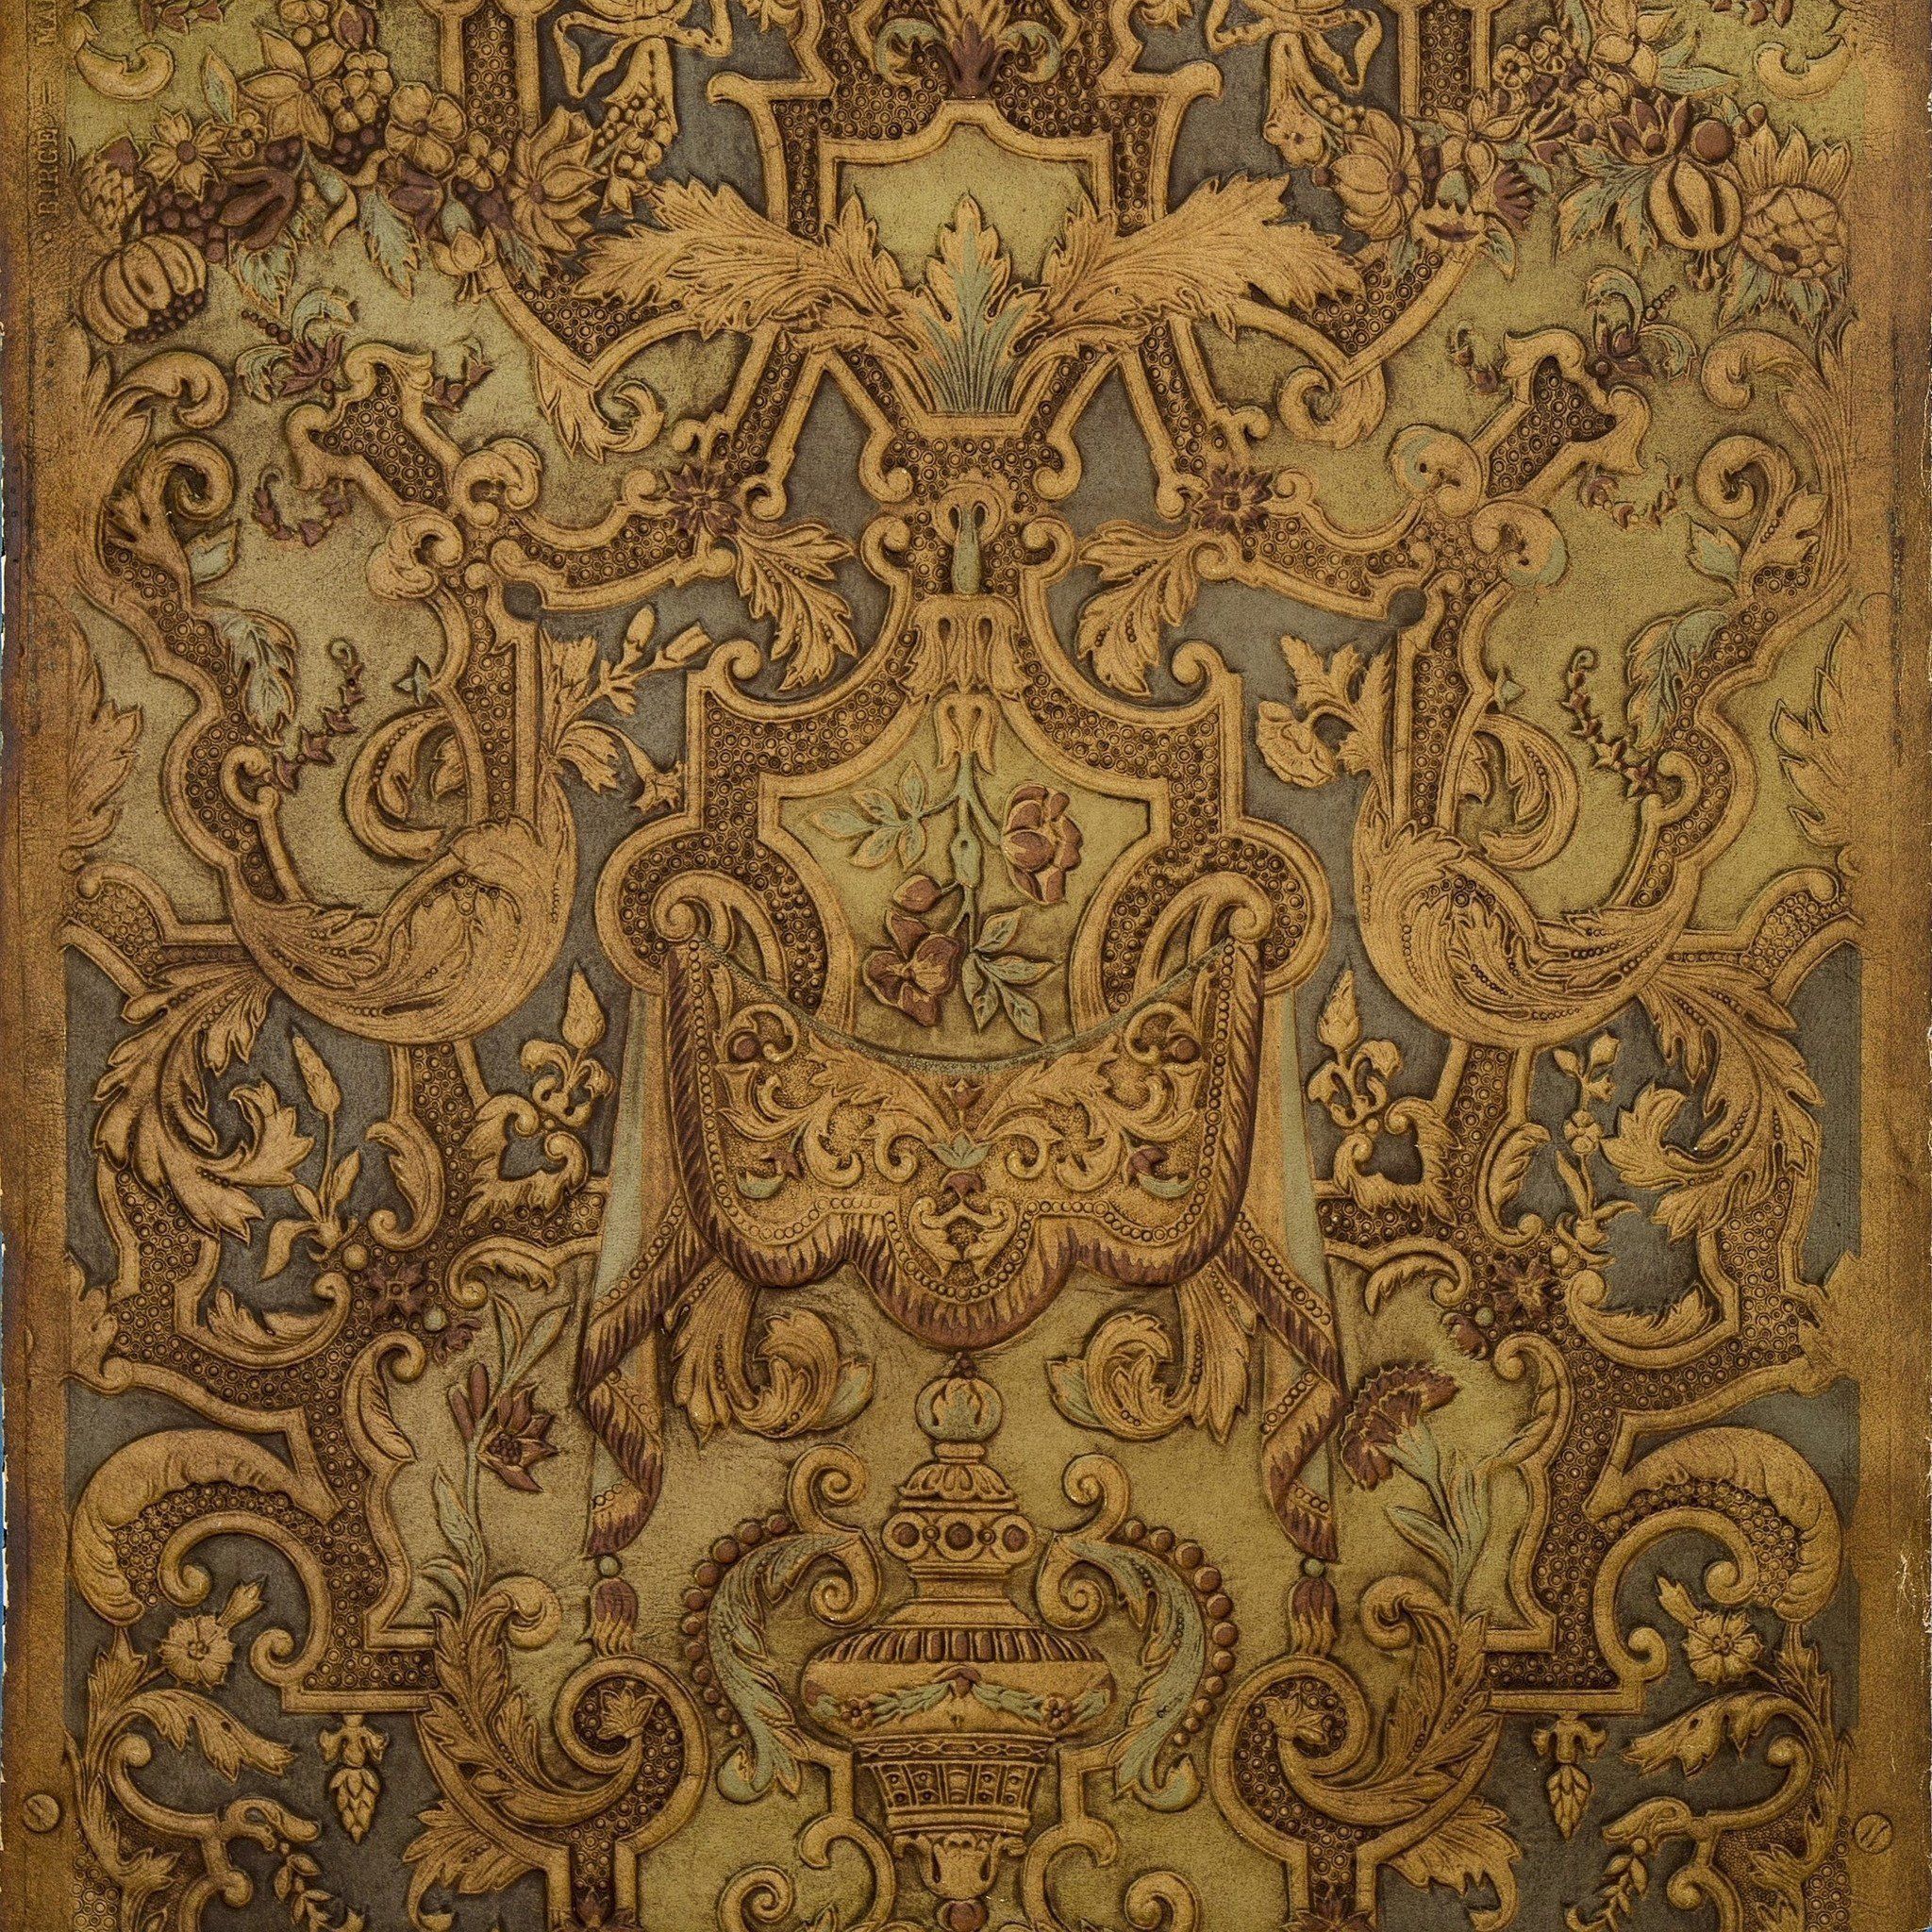 Spanish Embossed Leather Antique Wallpaper & Company